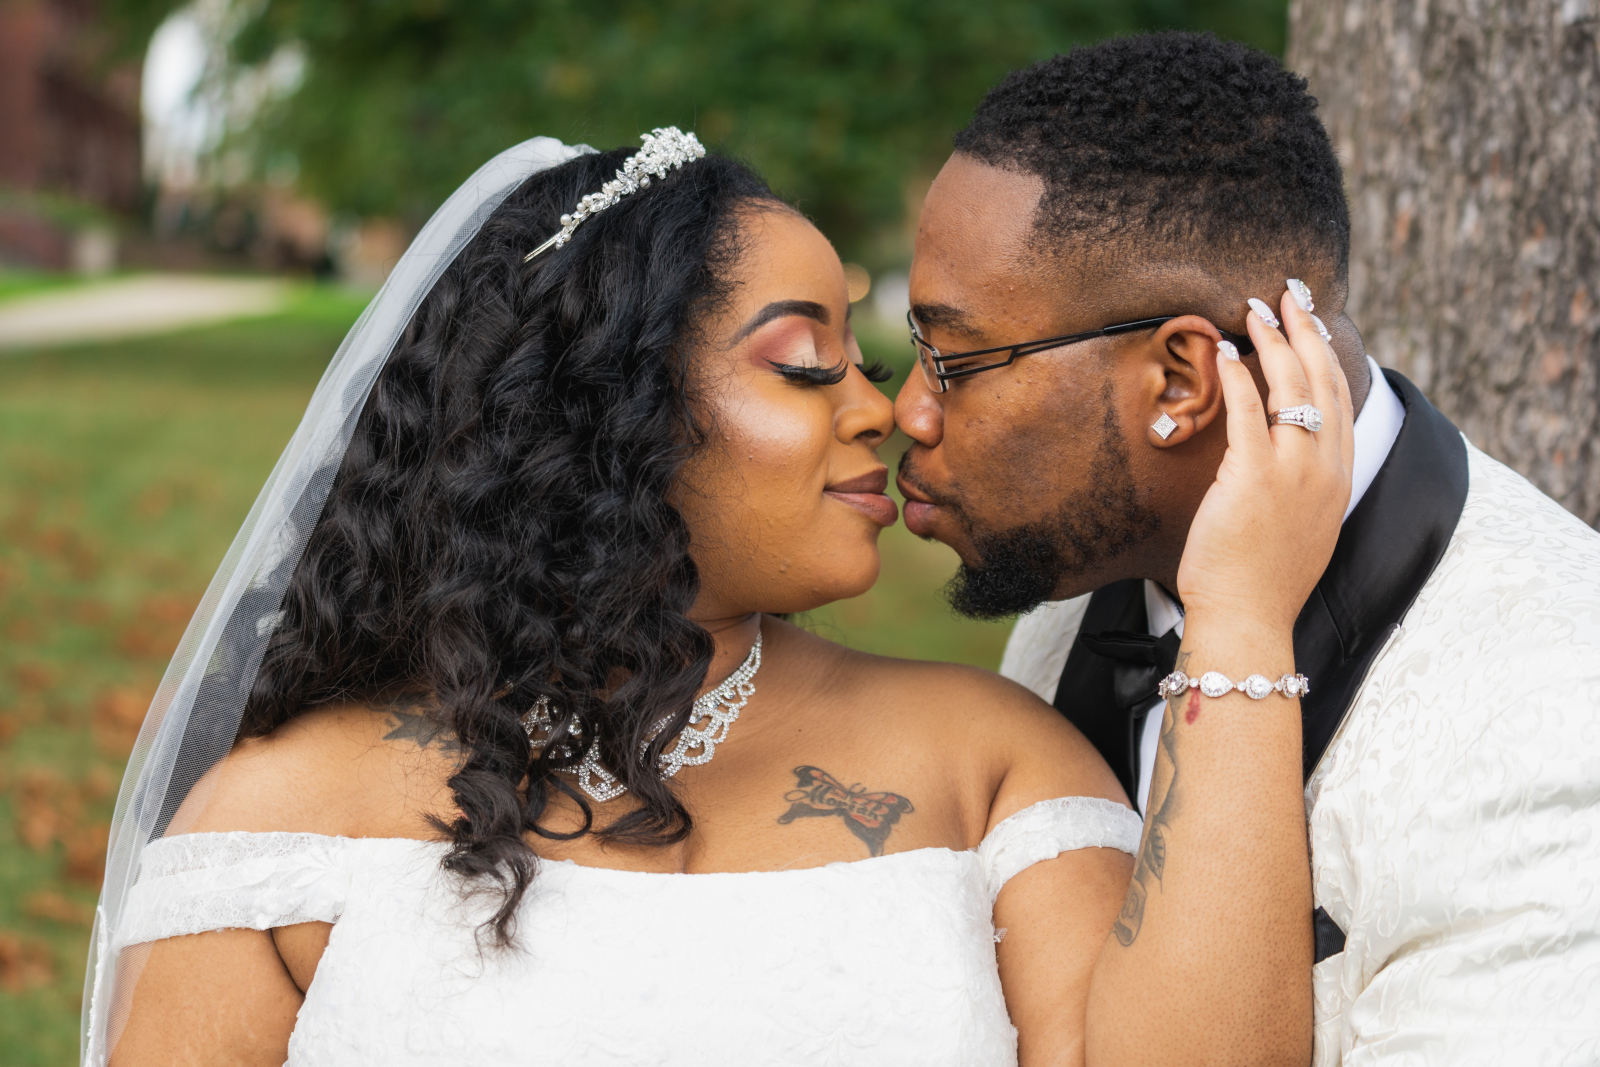 Bride and groom wedding portrait, cute, romantic, outdoor, nature, tree, beautiful African American bride, African American wedding, romantic wedding ceremony at Hilton Akron/Fairlawn